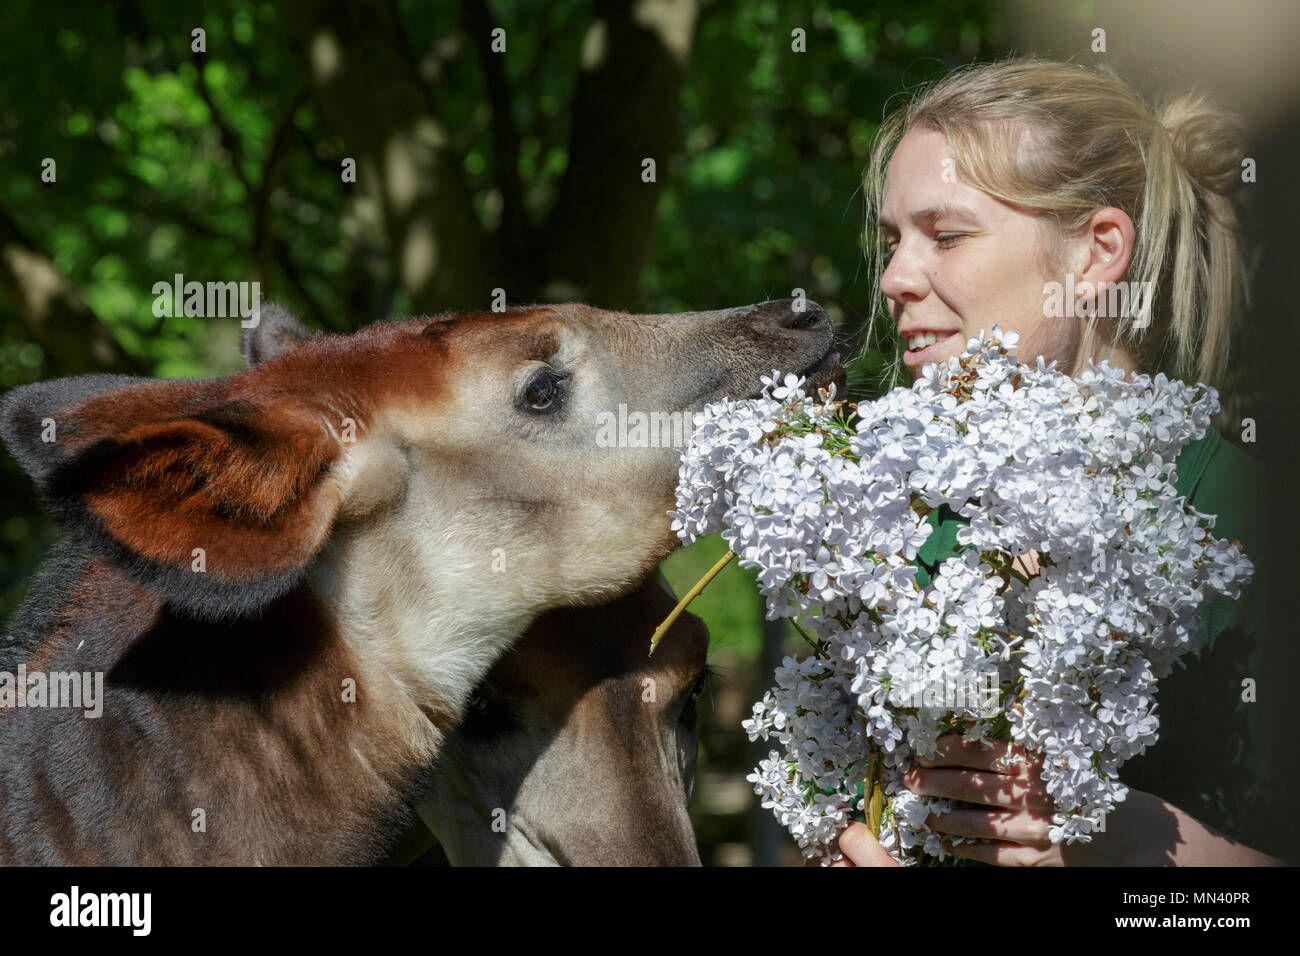 ZSL London Zoo, London, 14th May 2018. Meghan, the young okapi, with her mum Oni and keeper Gemma Metcalf, is given a royal treat to celebrate the forthcoming Royal Wedding – a bouquet of edible violet flowers to rival her namesake’s, Meghan Markle. The five-month-old, who was named after Meghan to commemorate the Royal couple’s engagement, is given the tasty blooms ahead of the big day - so neither Meghan has to share the spotlight. Credit: Imageplotter News and Sports/Alamy Live News Stock Photo